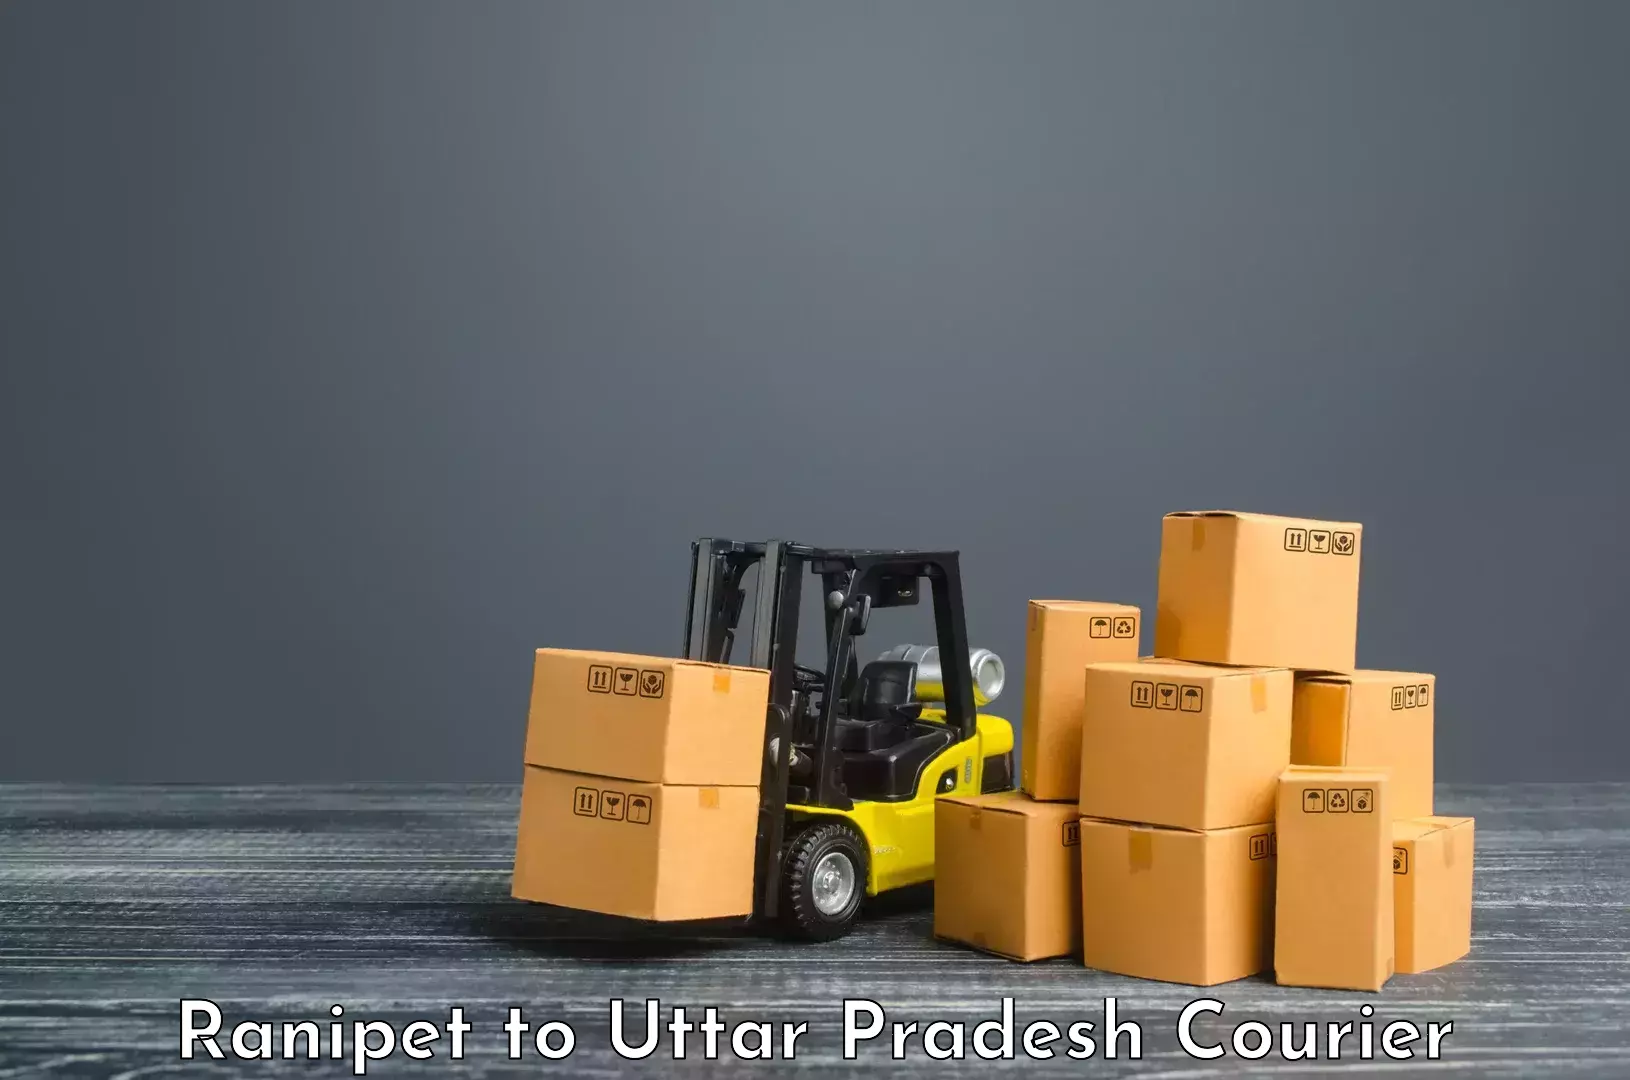 Customer-centric shipping Ranipet to Lucknow